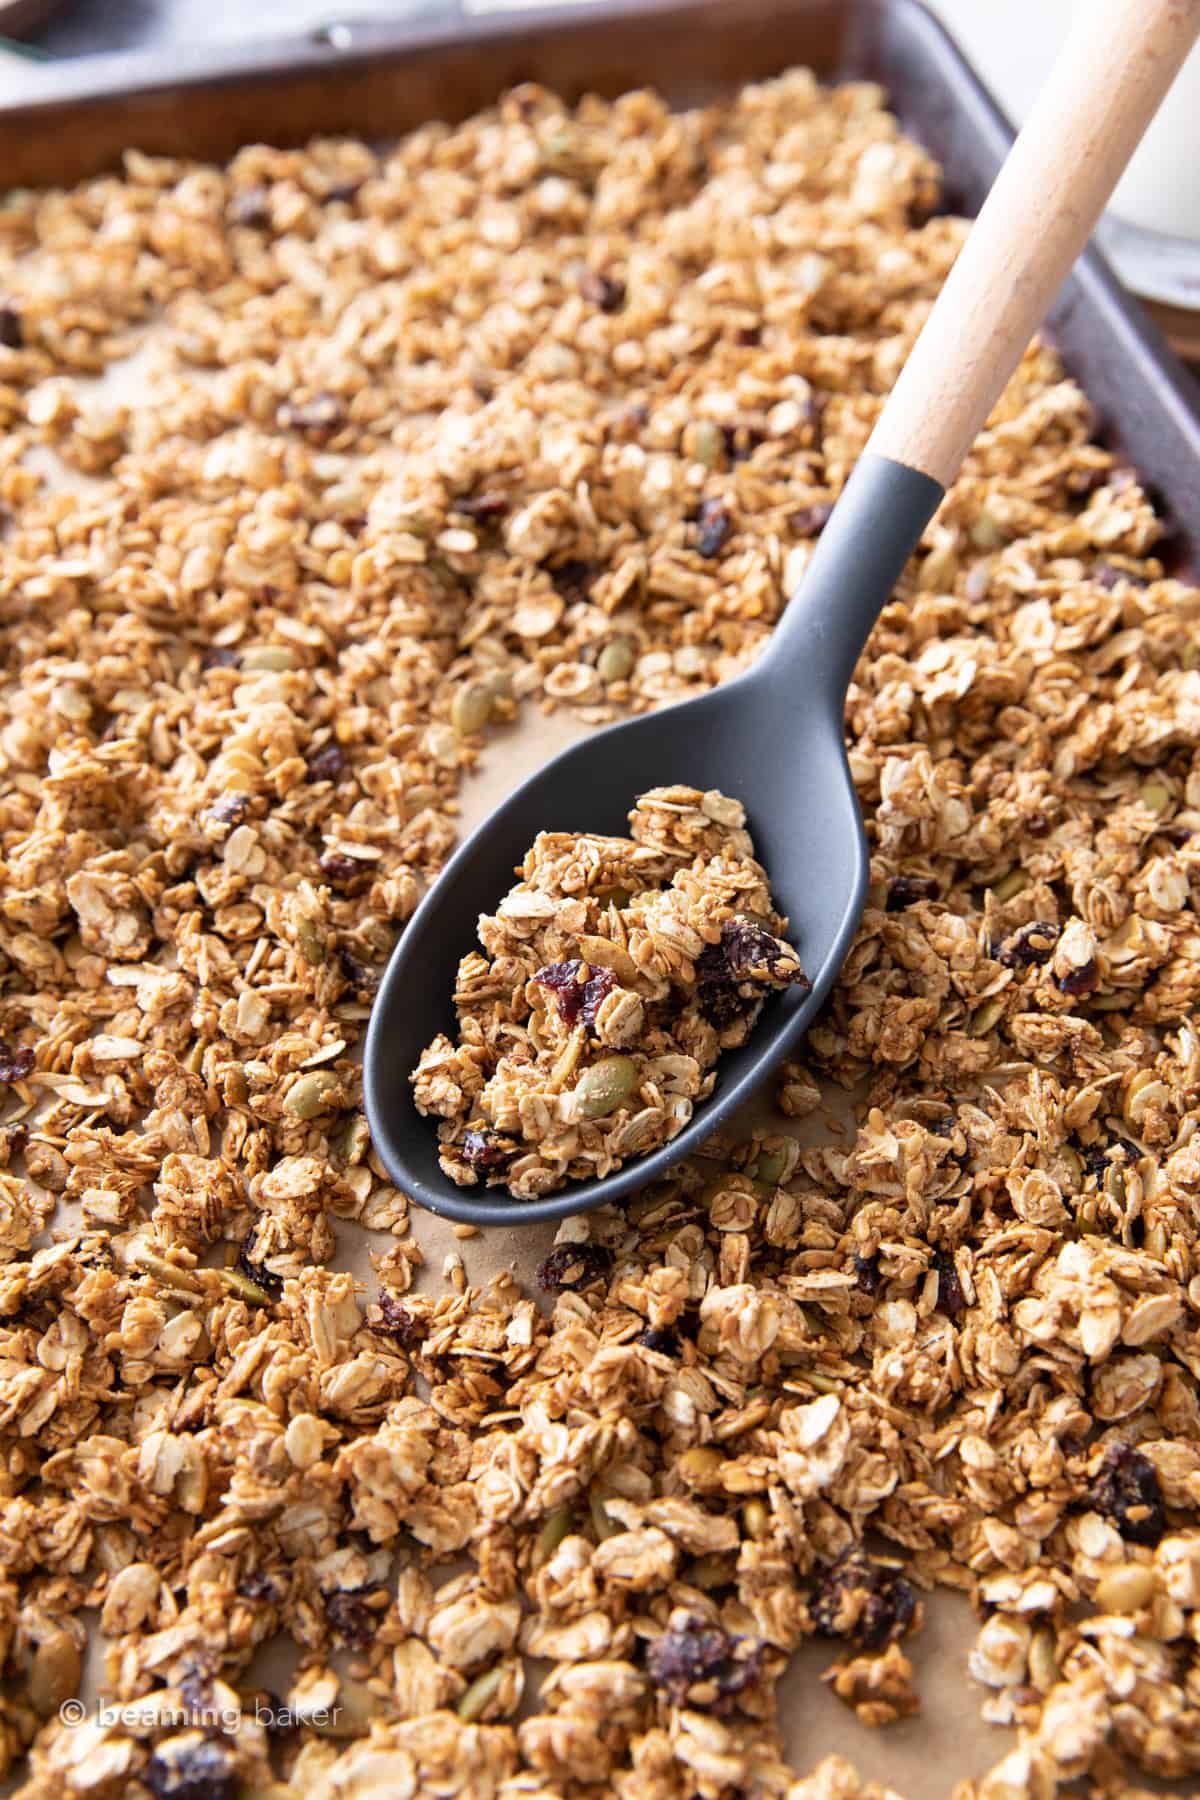 Large gray spoon filled with granola with flax seed sitting on a baking sheet filled with granola